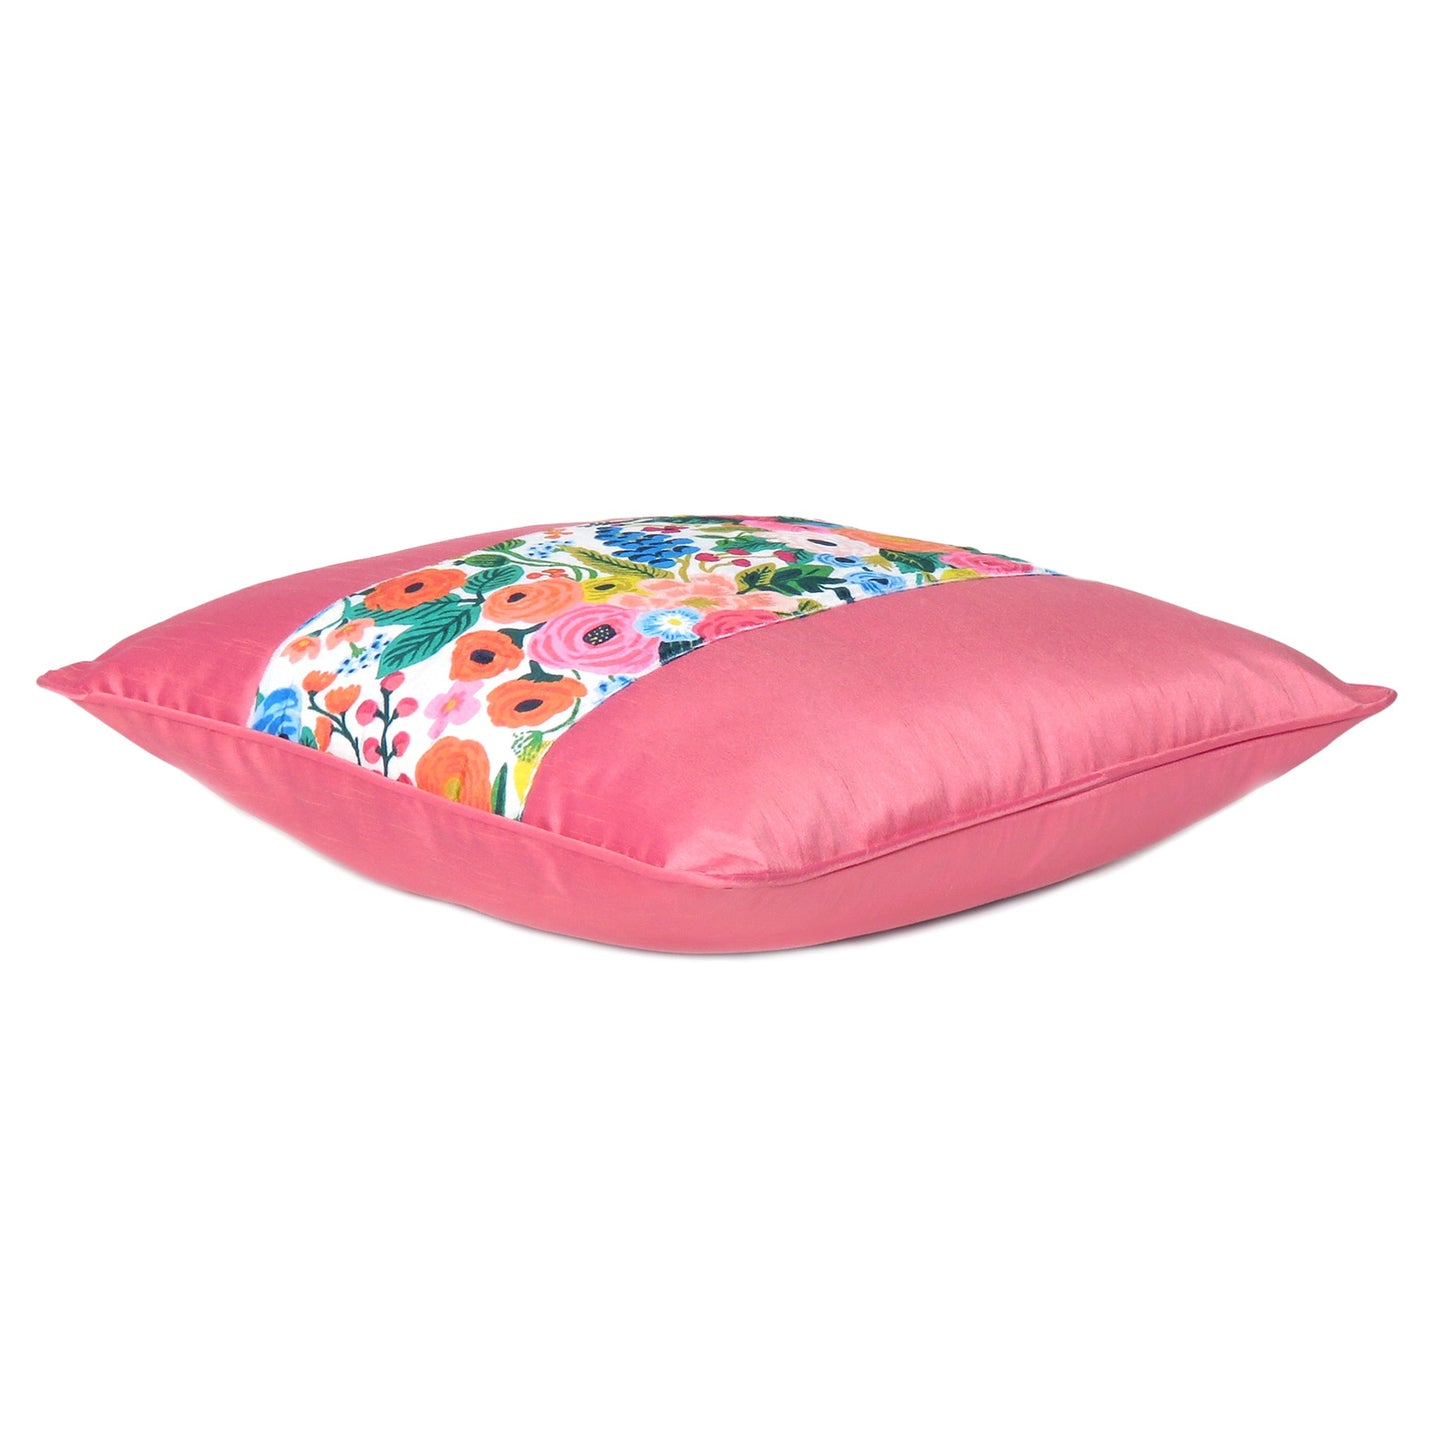 Velvet Polydupion Decorative Printed Cushion Cases in Set of 2 - Pink